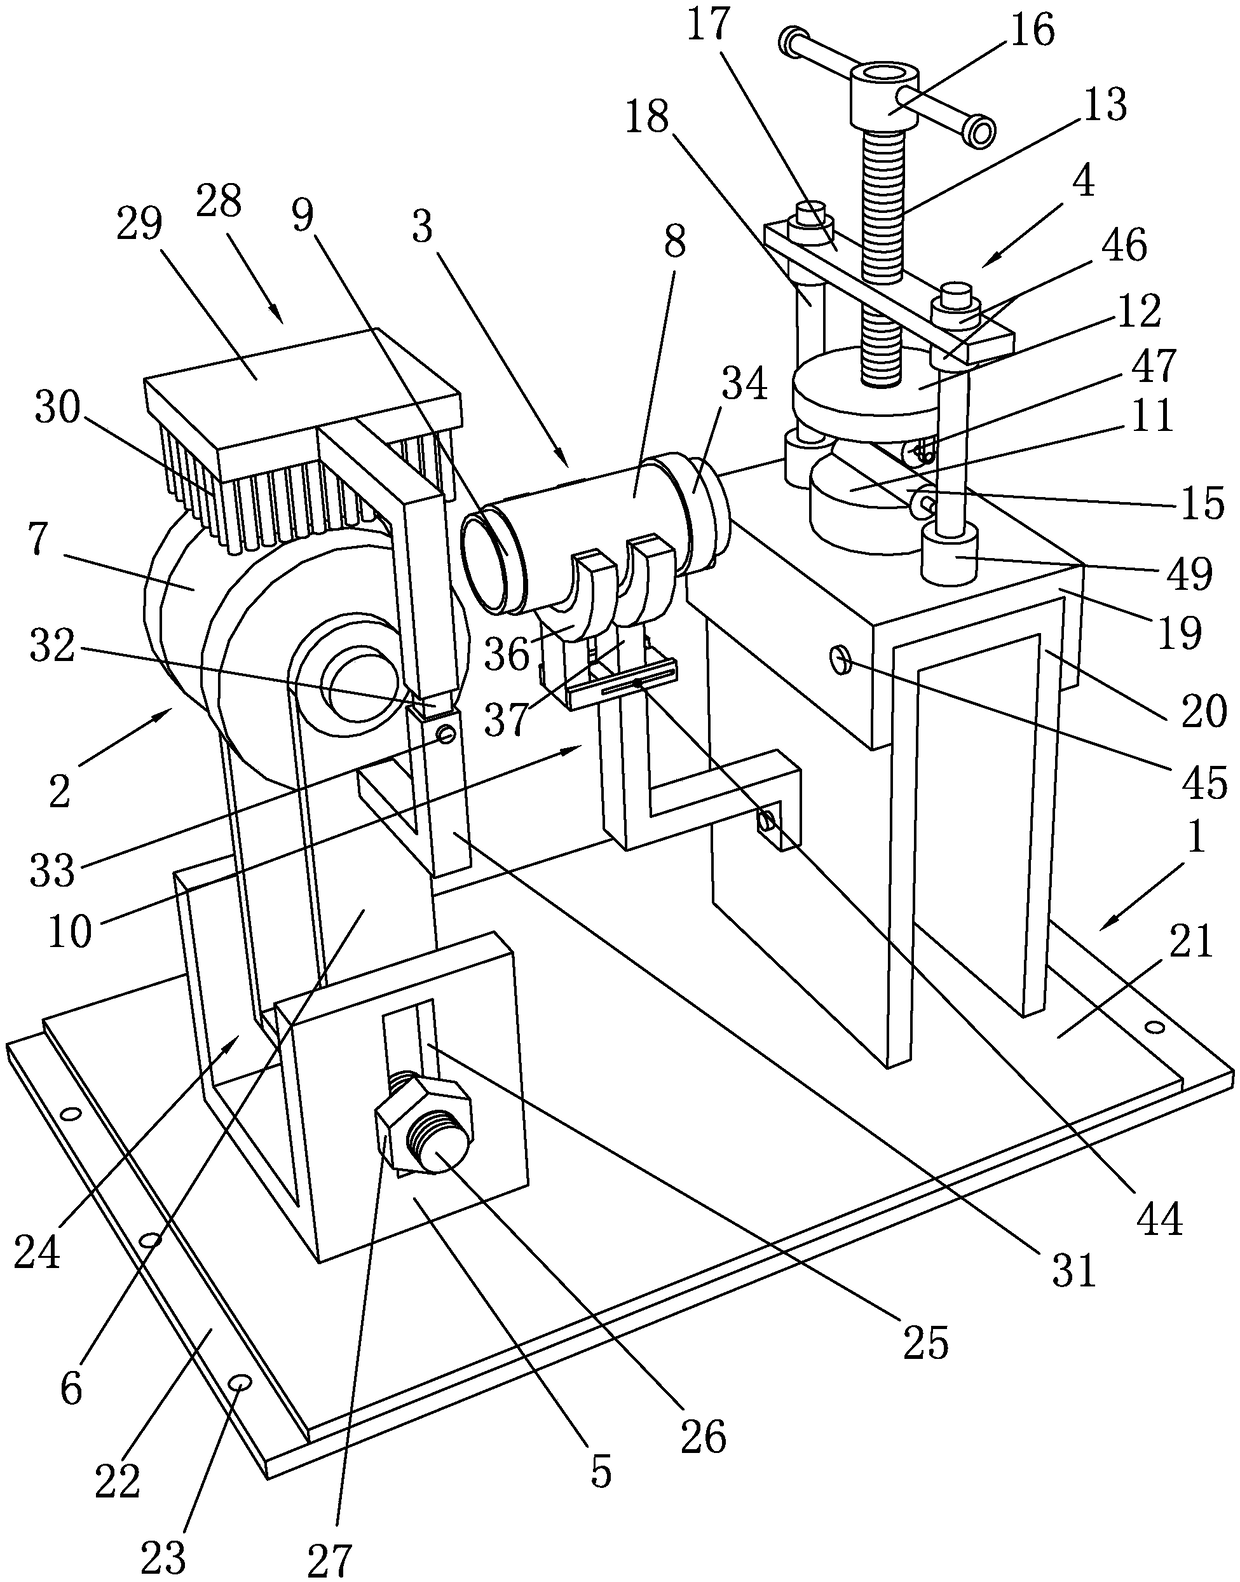 Yarn guiding device for textile product production